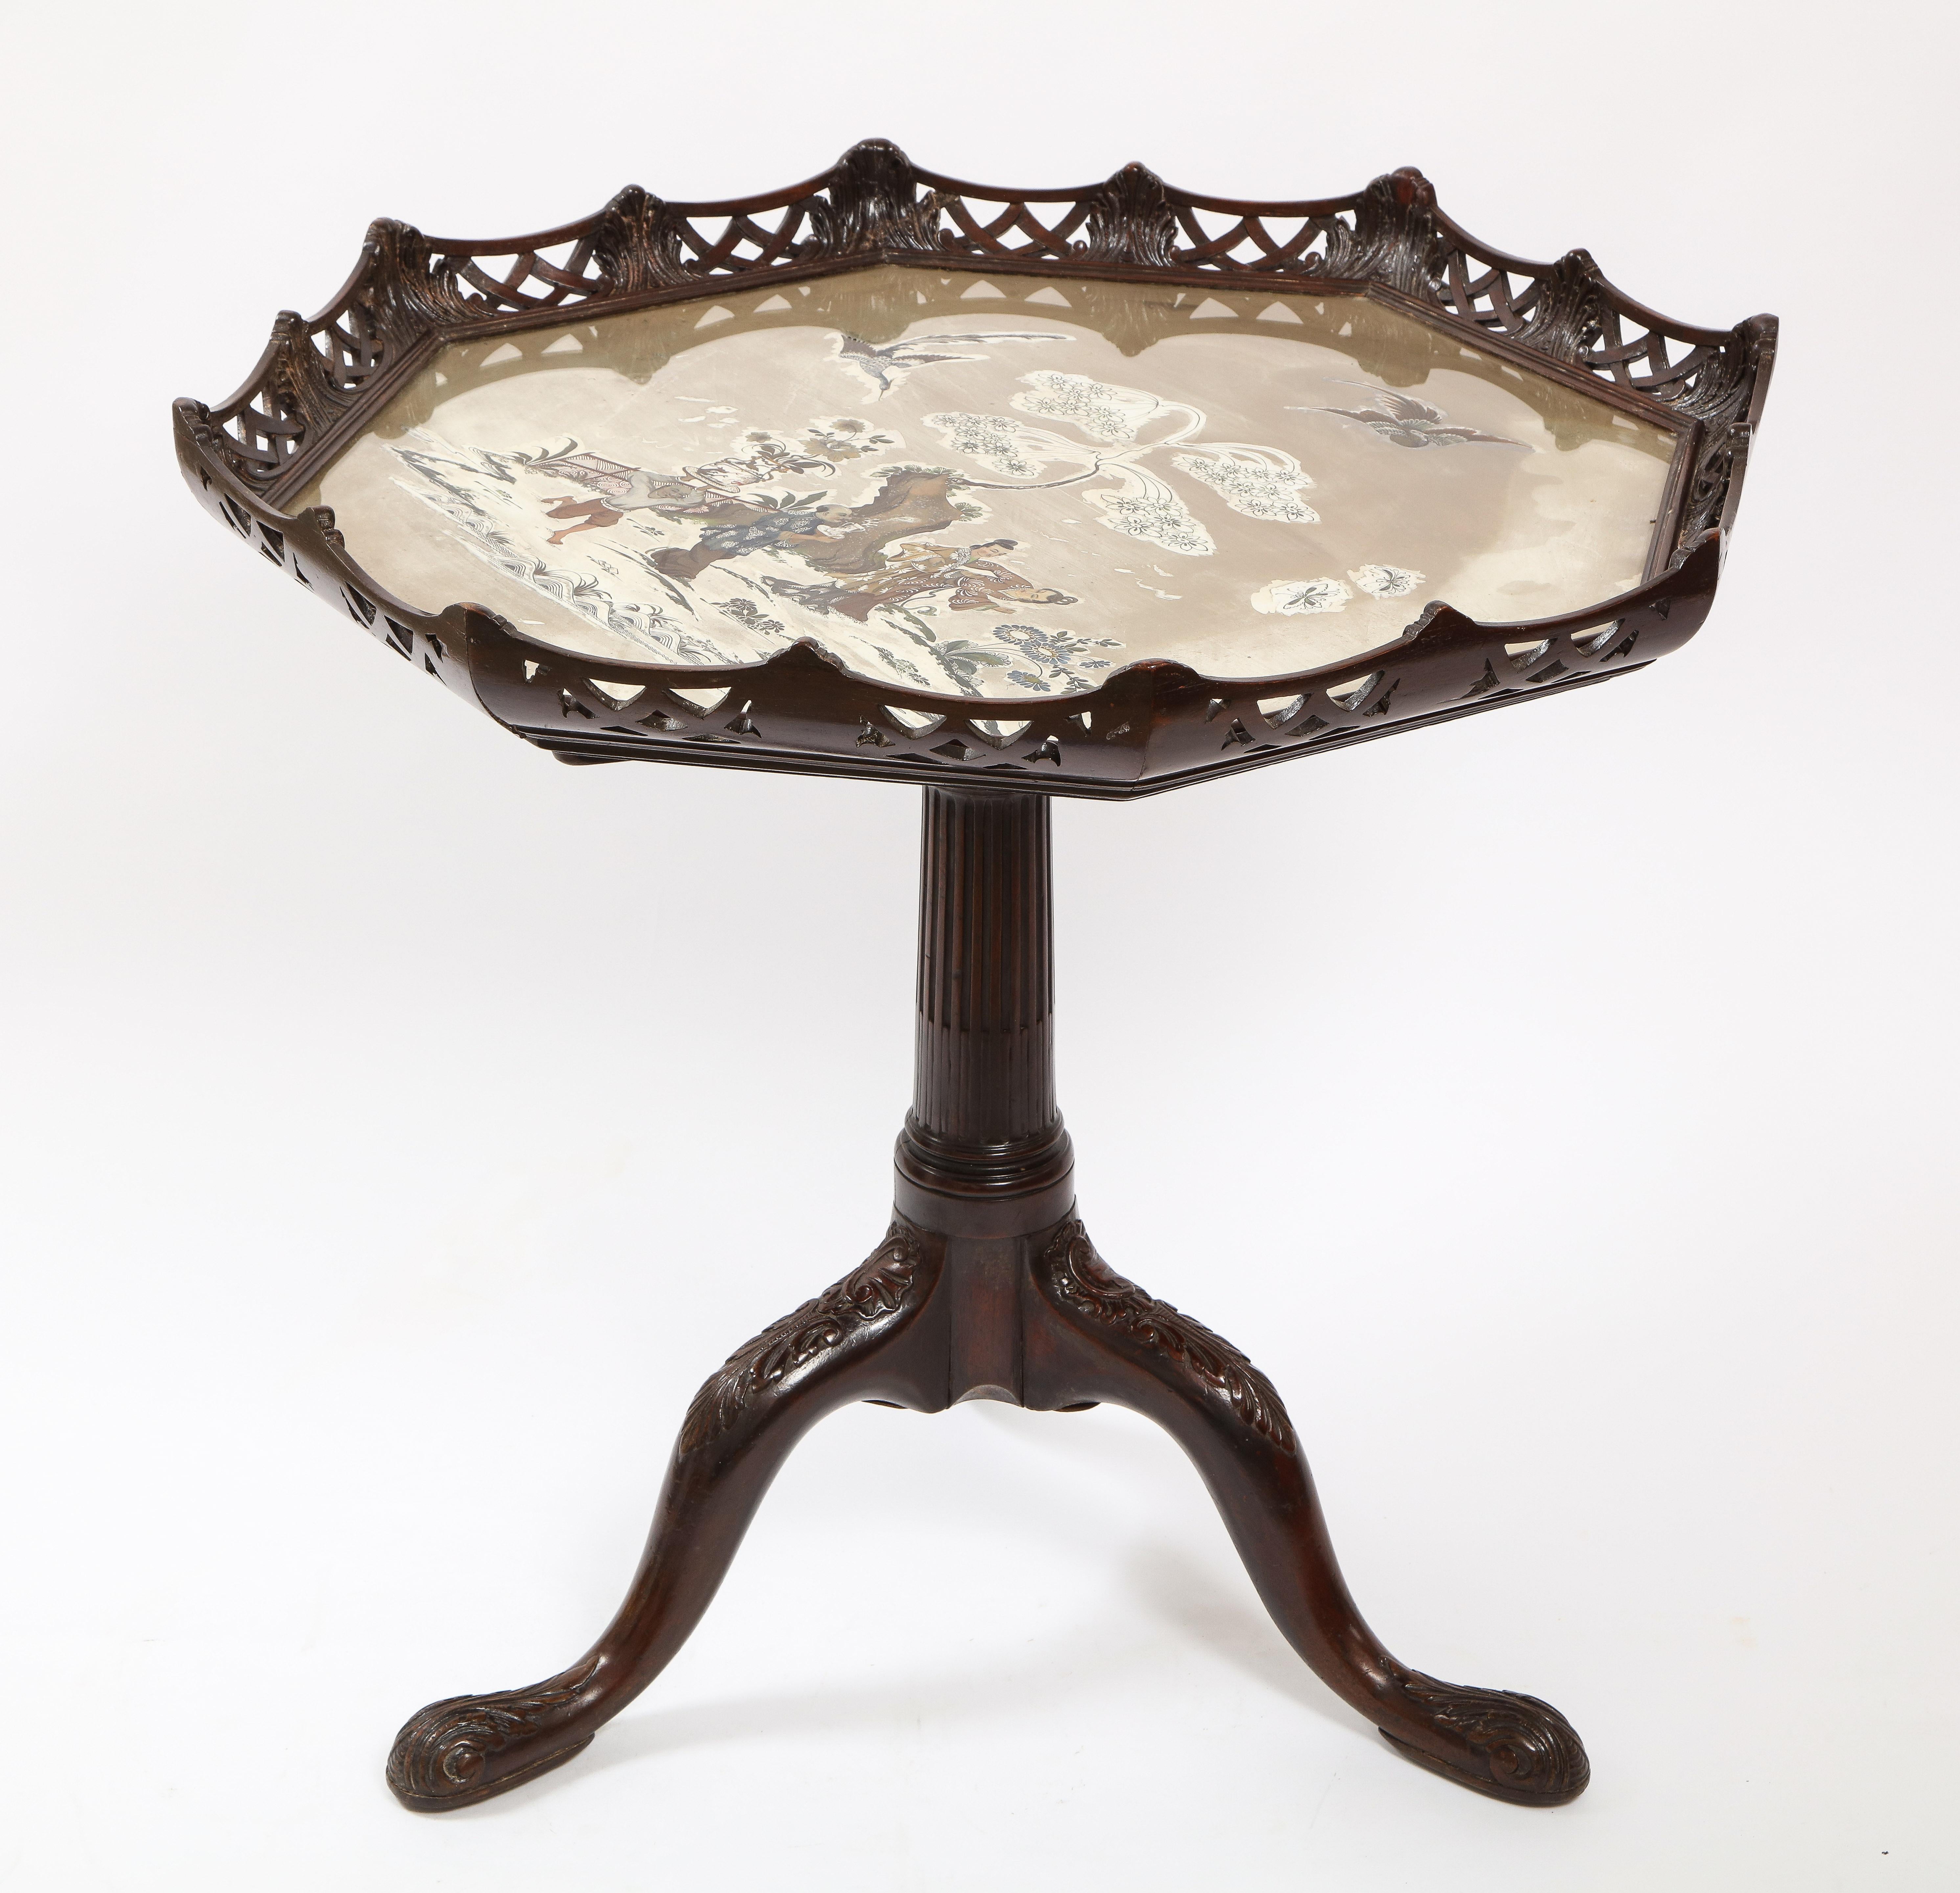 An unusual and fabulous 19th century English George the II/III style Octagonal hand-carved Mahogany tilt-top table with a silvered Chinoiseries Reverse on glass mirrored top. This table truly beautiful with an open-work wood top border in a lattice